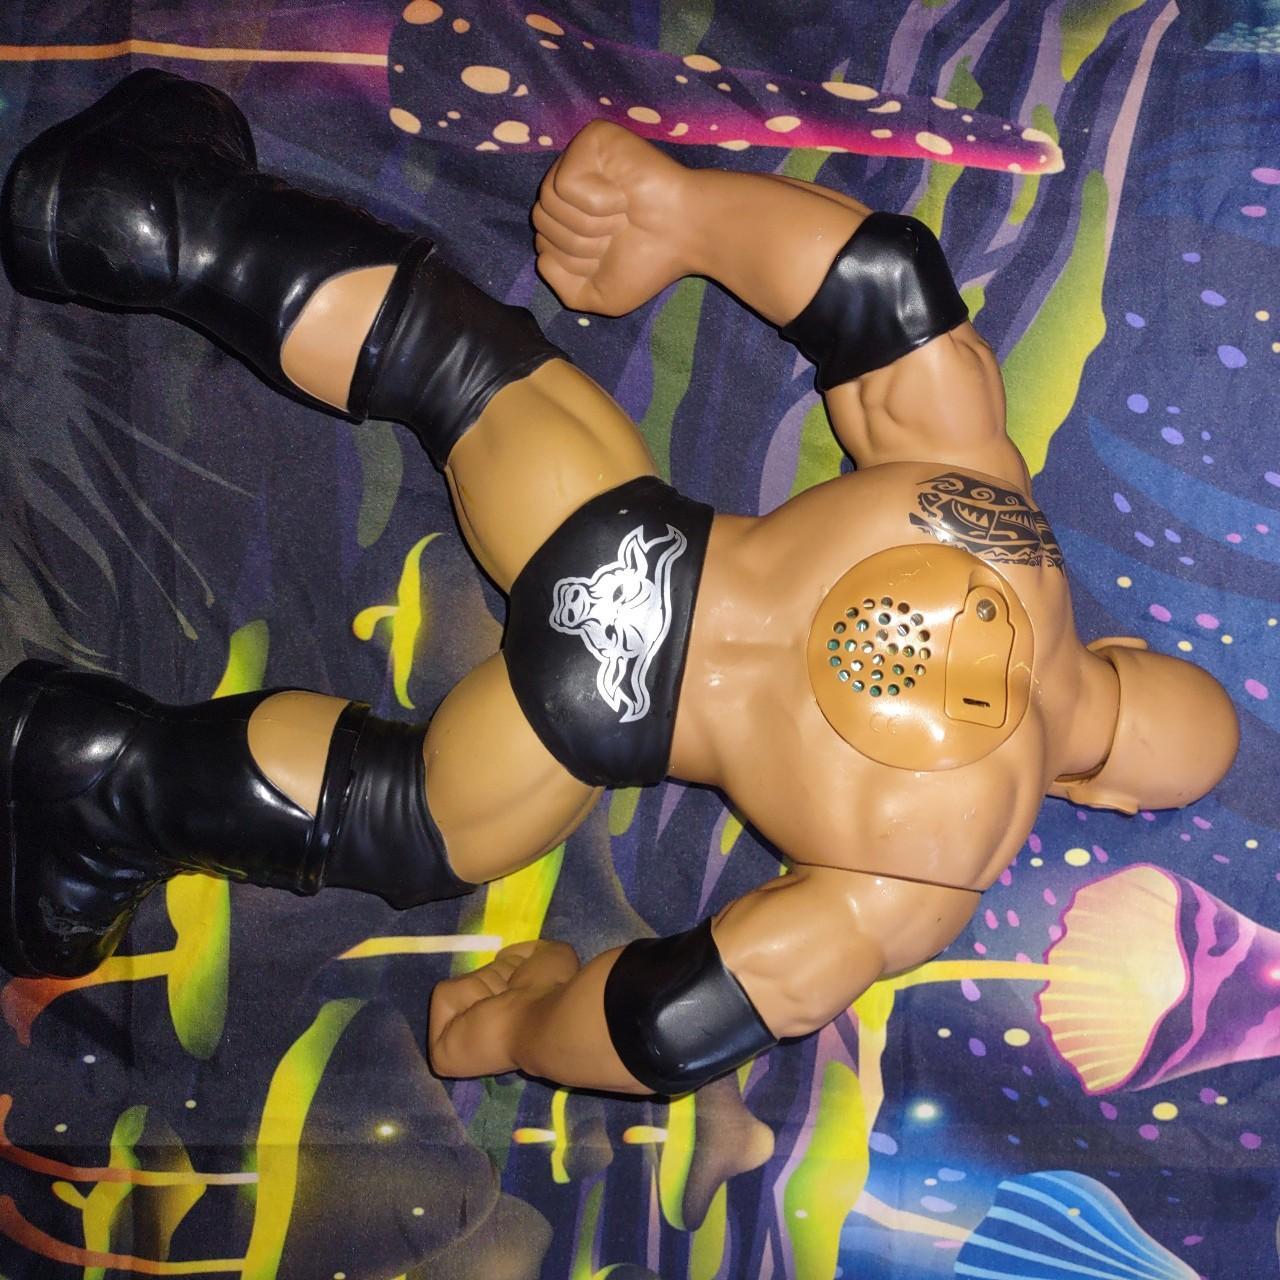 Product Image 4 - The Rock Figure

WWE's Dwayne "The